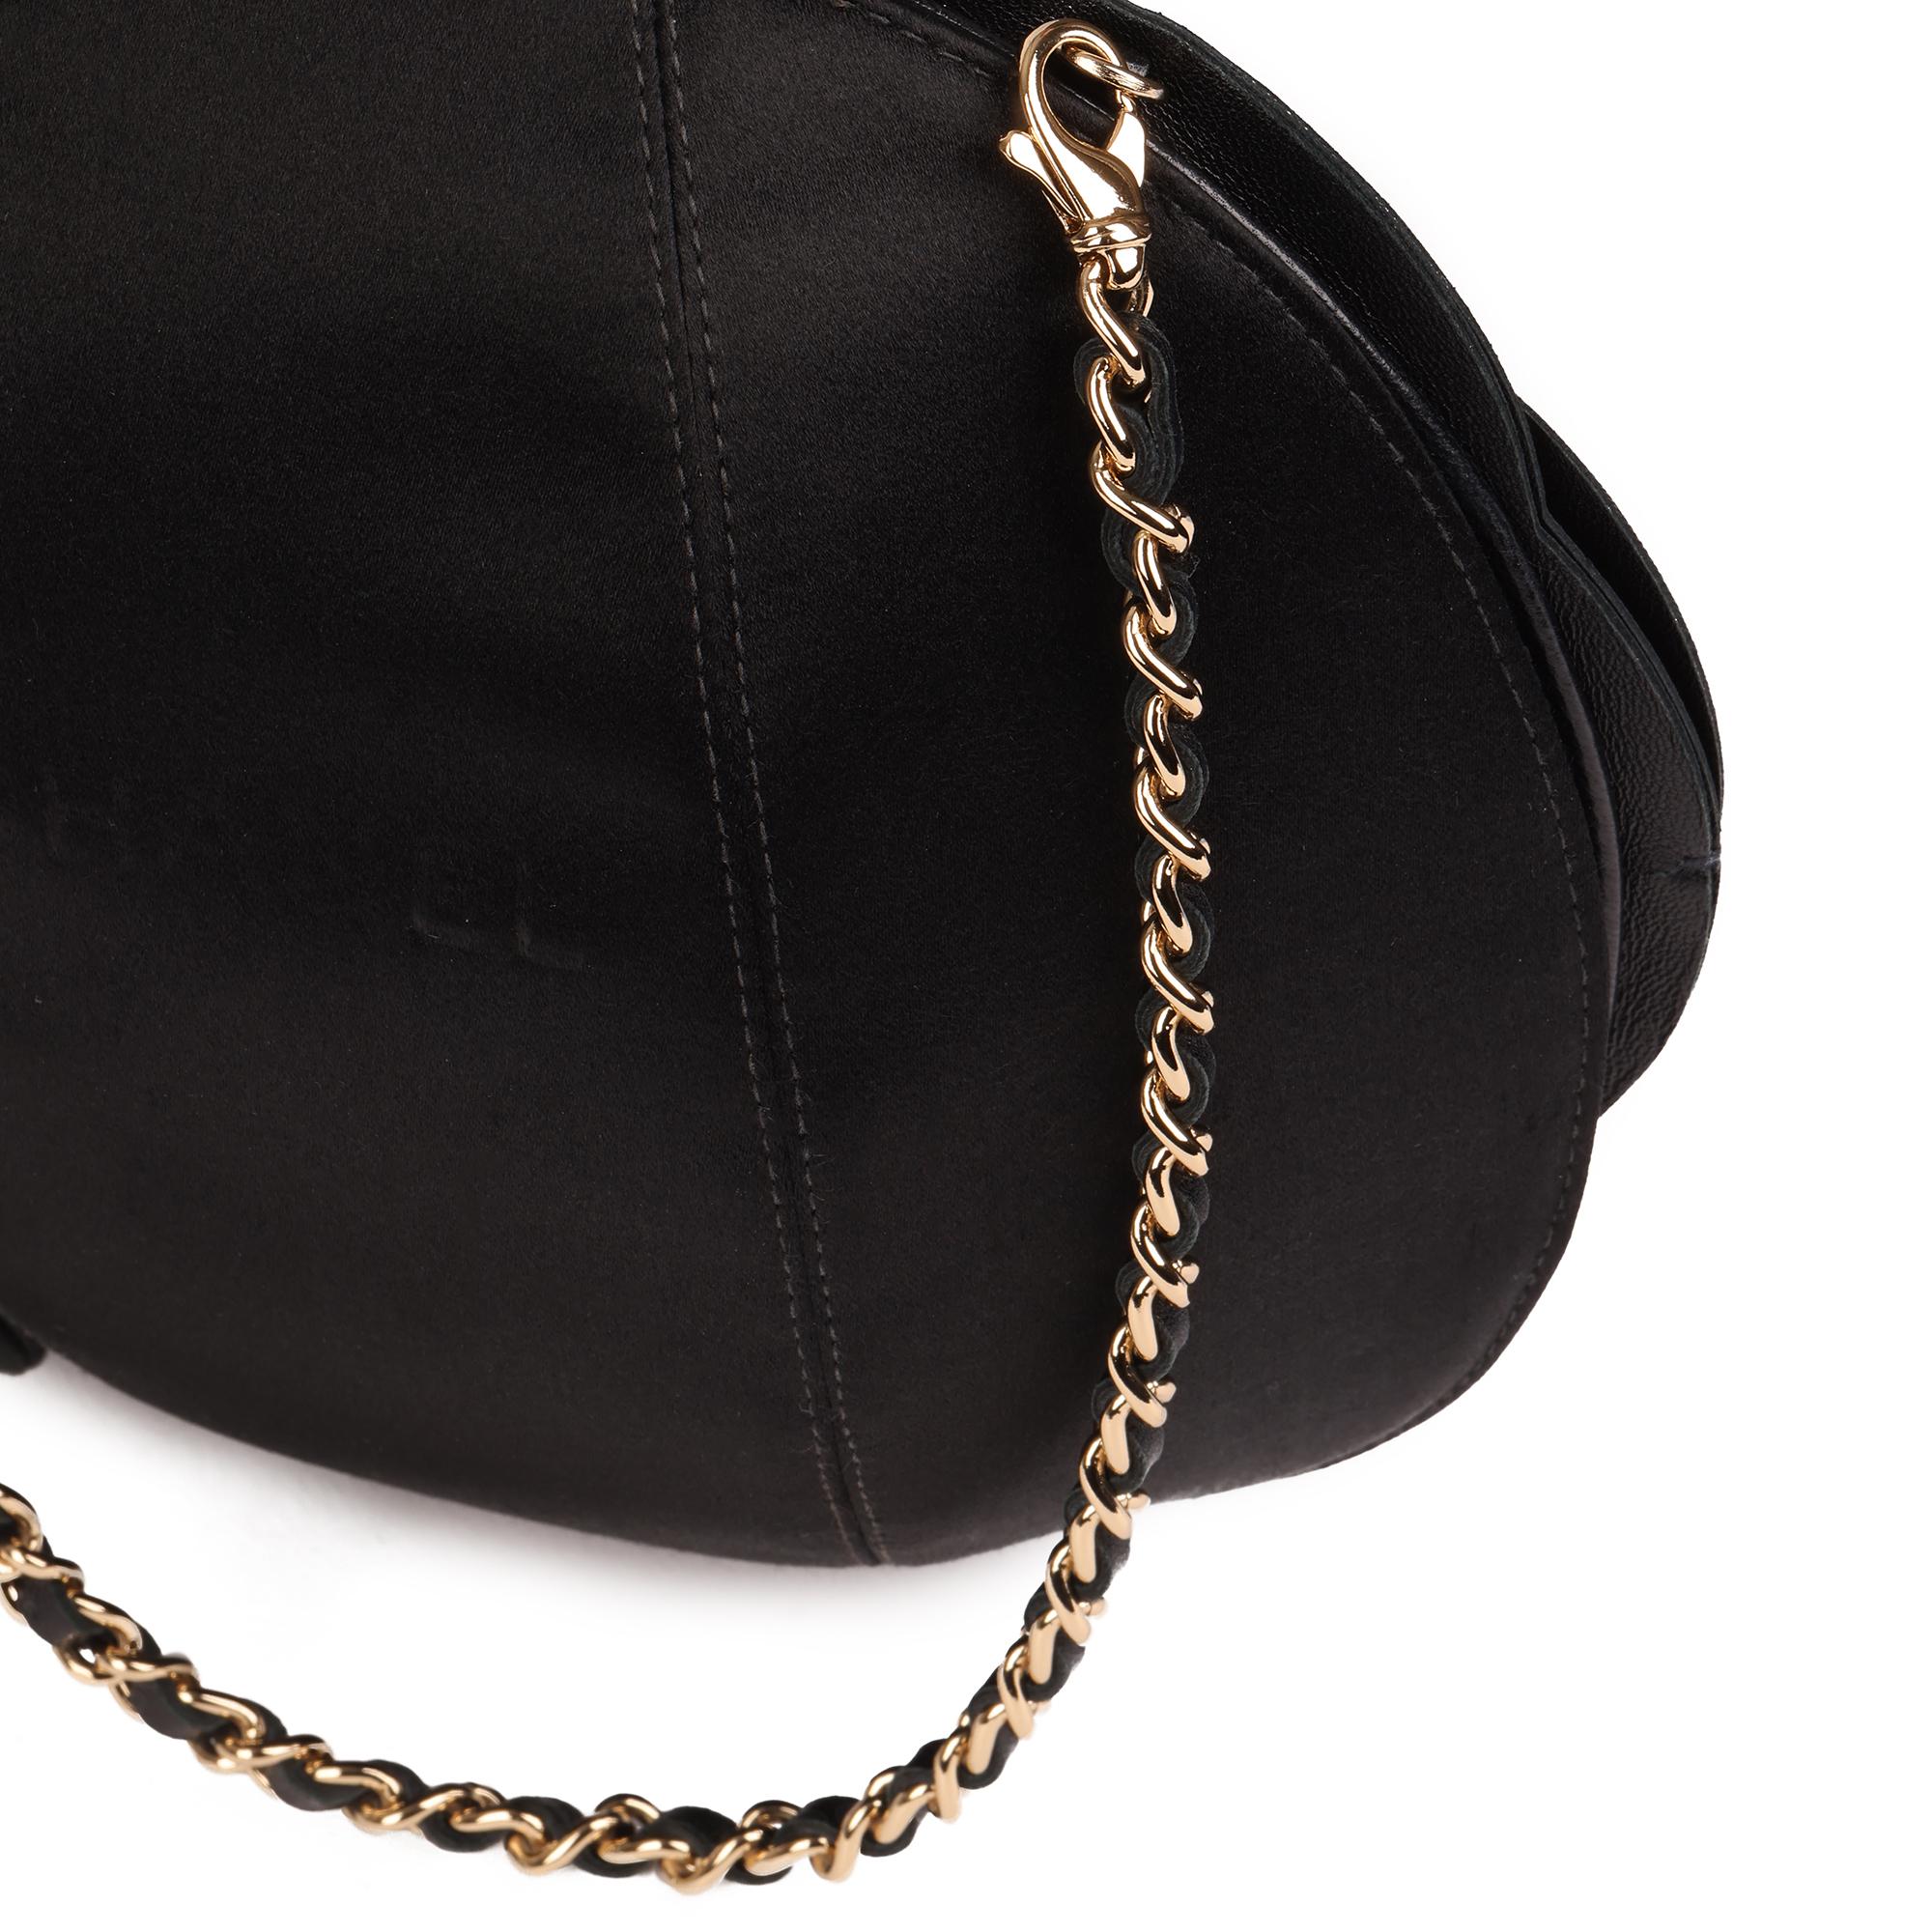 CHANEL
Black Lambskin Camellia Clutch-on-Chain COC

Serial Number: 7492899
Age (Circa): 2003
Accompanied By: Chanel Dust Bag 
Authenticity Details: Serial Sticker (Made in France)
Gender: Ladies
Type: Top Handle

Colour: Black
Hardware: